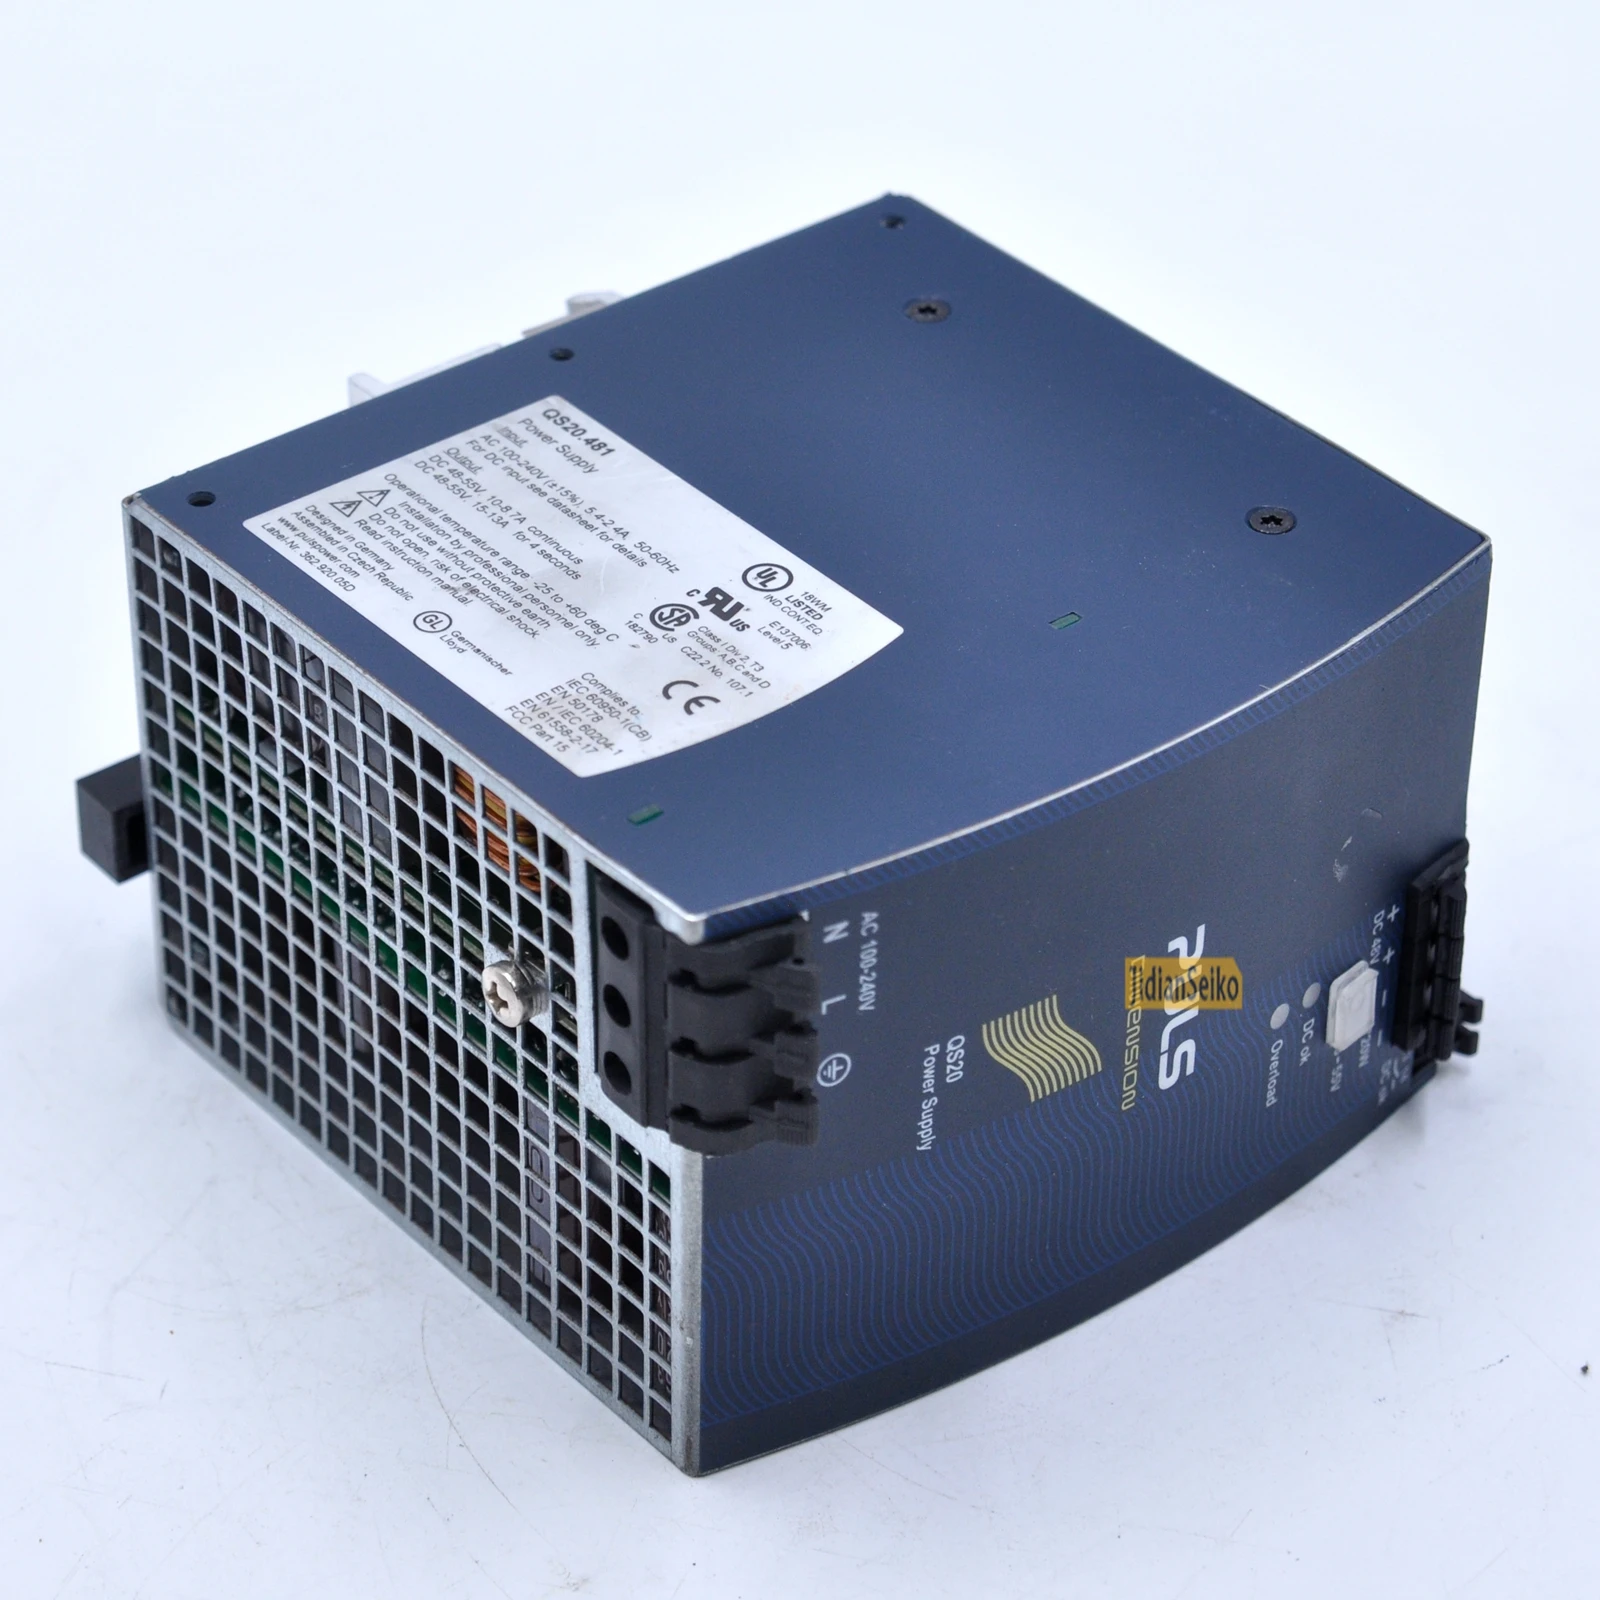 Used German Power Supply QS20.481 48V 10A